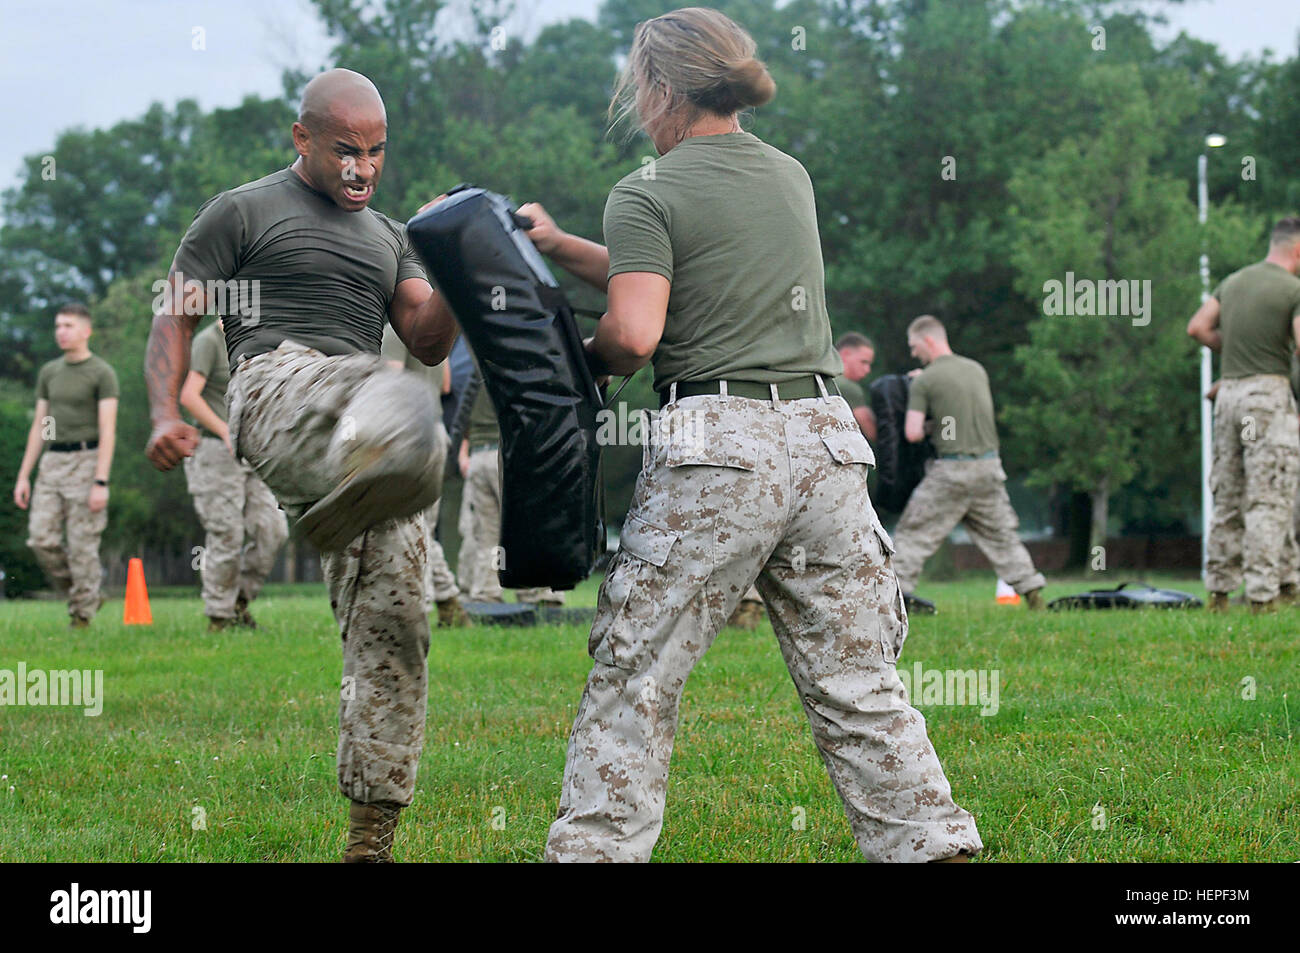 Marine 1st Sgt. Willy D. Carrion delivers a kick to Marine Staff Sgt. Stevie C. Hagler during a Headquarters and Service Battalion, Headquarters Marine Corps, Henderson Hall martial arts training exercise devoted to Medal of Honor recipient Marine Cpl. William “Kyle” Carpenter on the Fort Myer portion of Joint Base Myer-Henderson Hall the morning of June 15. (Joint Base Myer-Henderson Hall PAO photo by Jim Dresbach) Marines withstand stringent PT exercise to recognize MOH recipient 150615-A-DZ999-740 Stock Photo